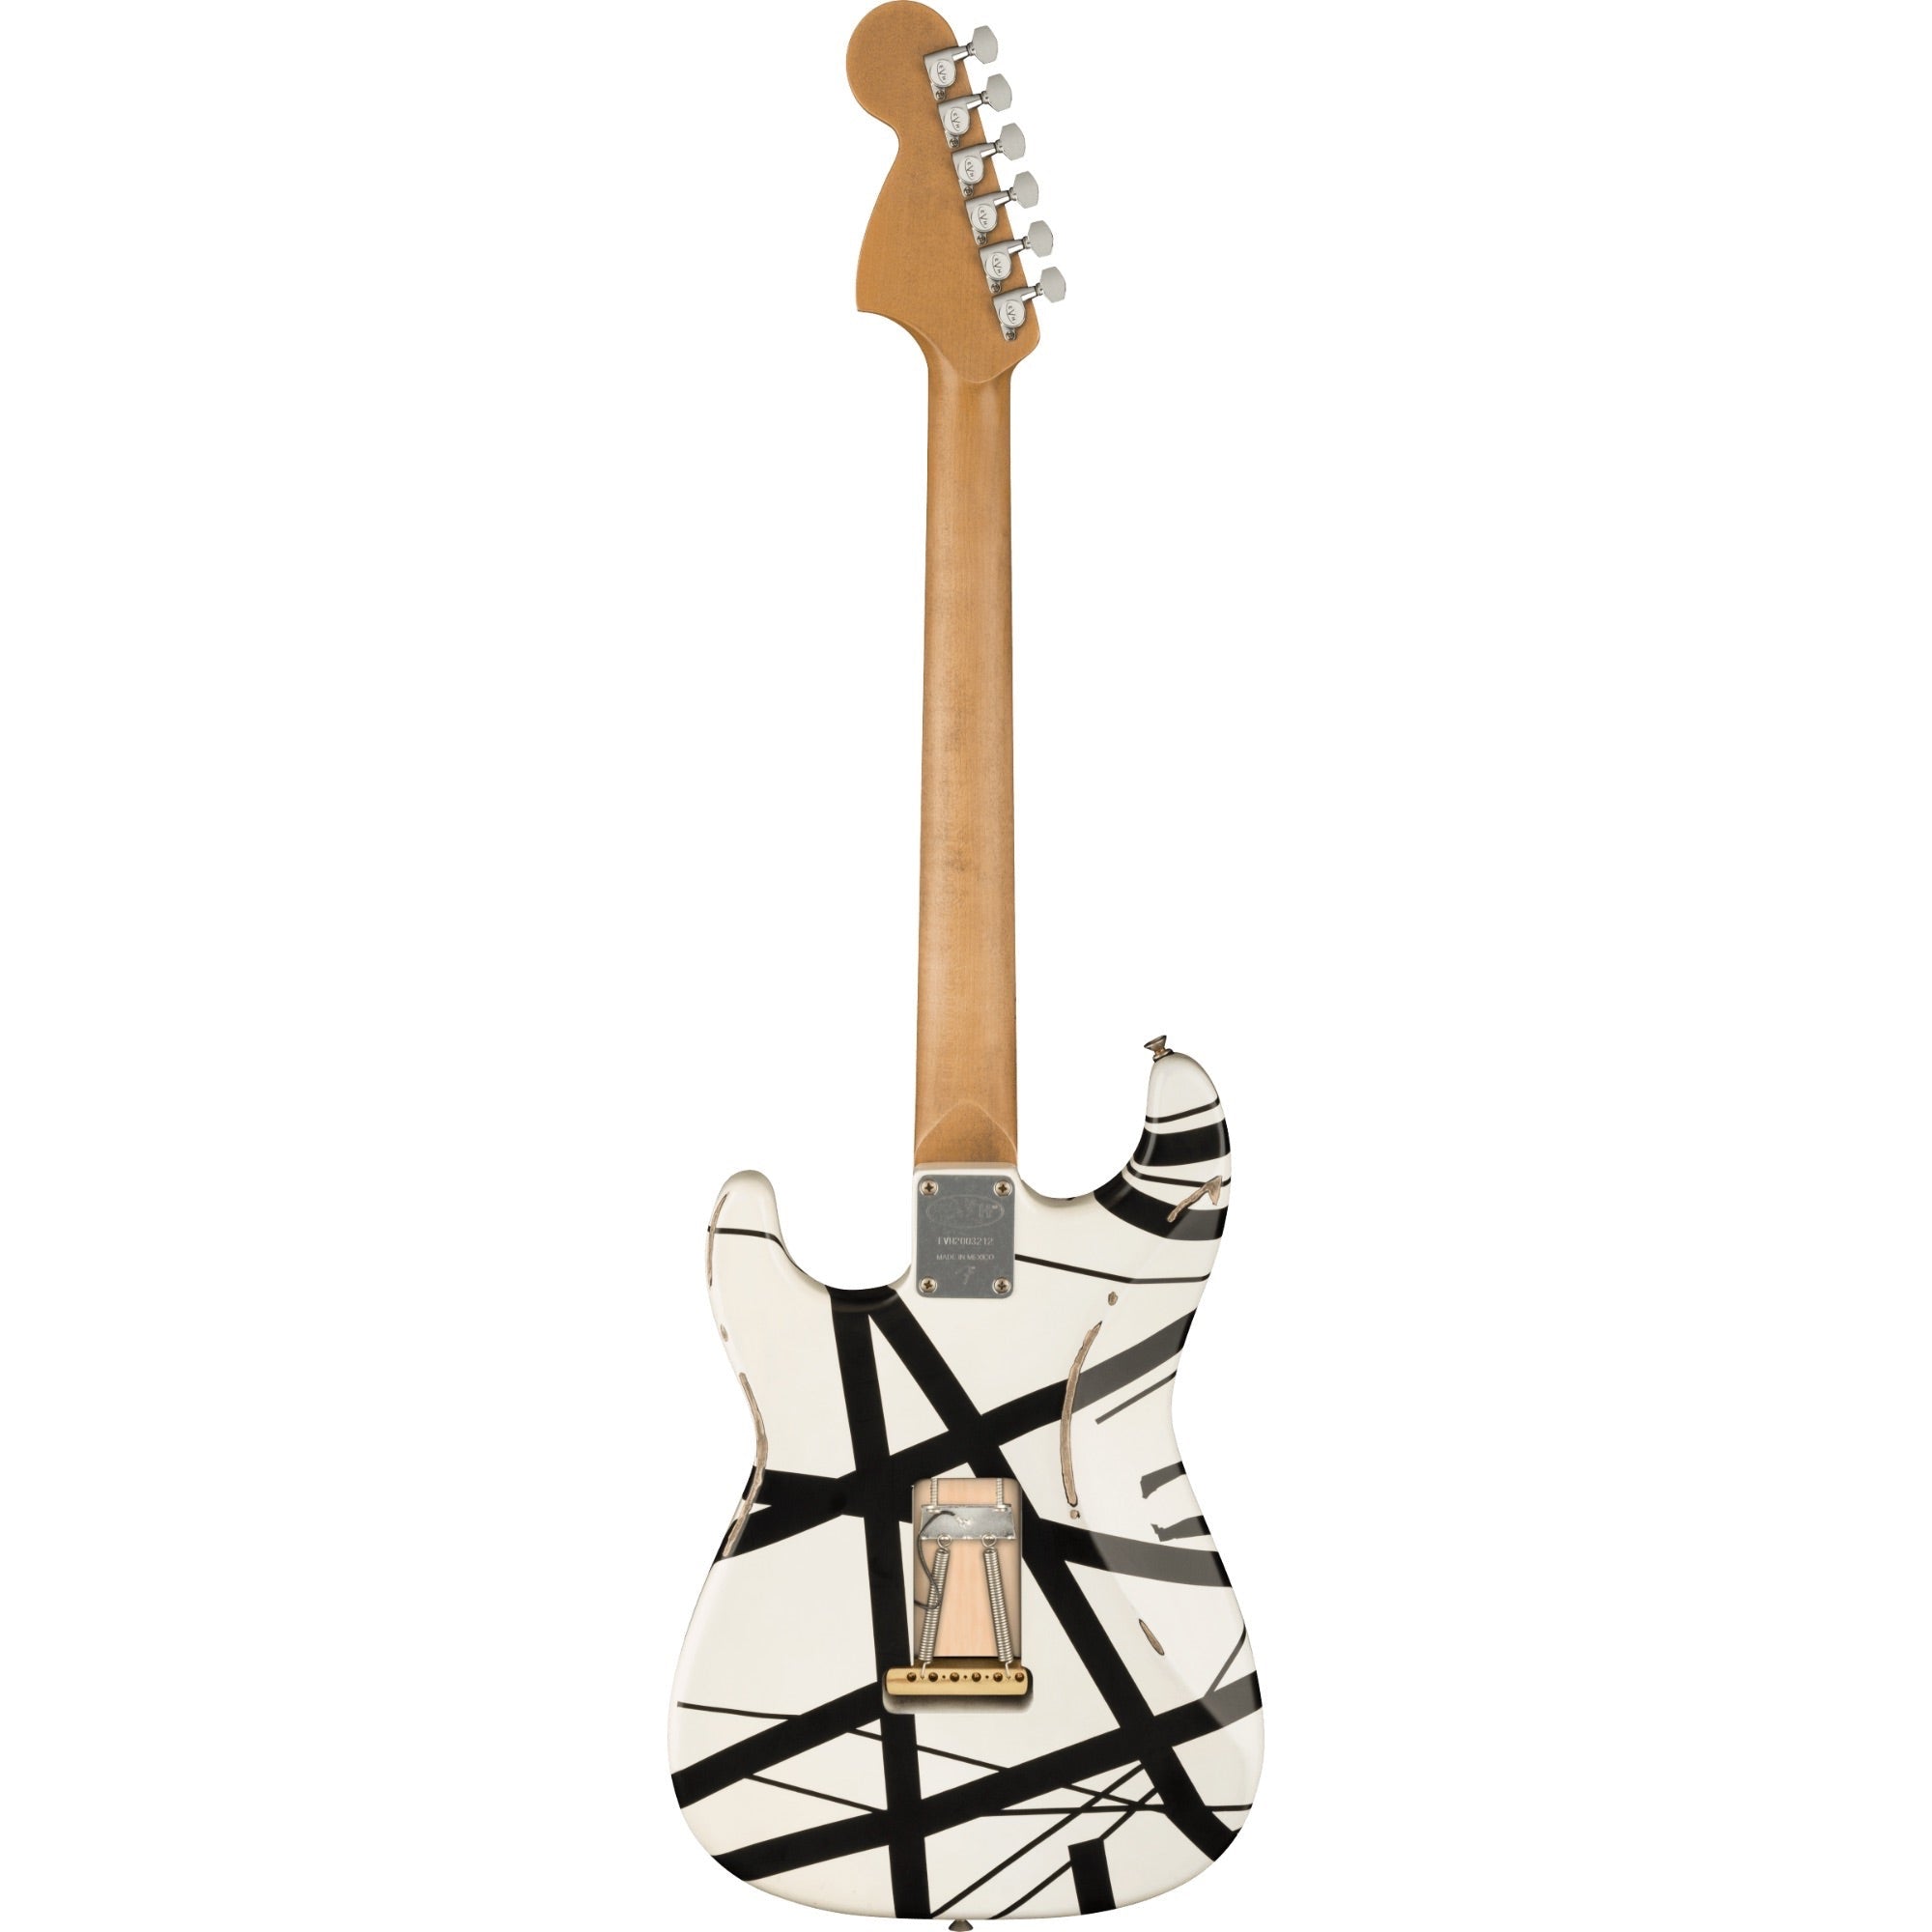 EVH Striped Series '78 Eruption Guitar, White with Black Stripes Relic